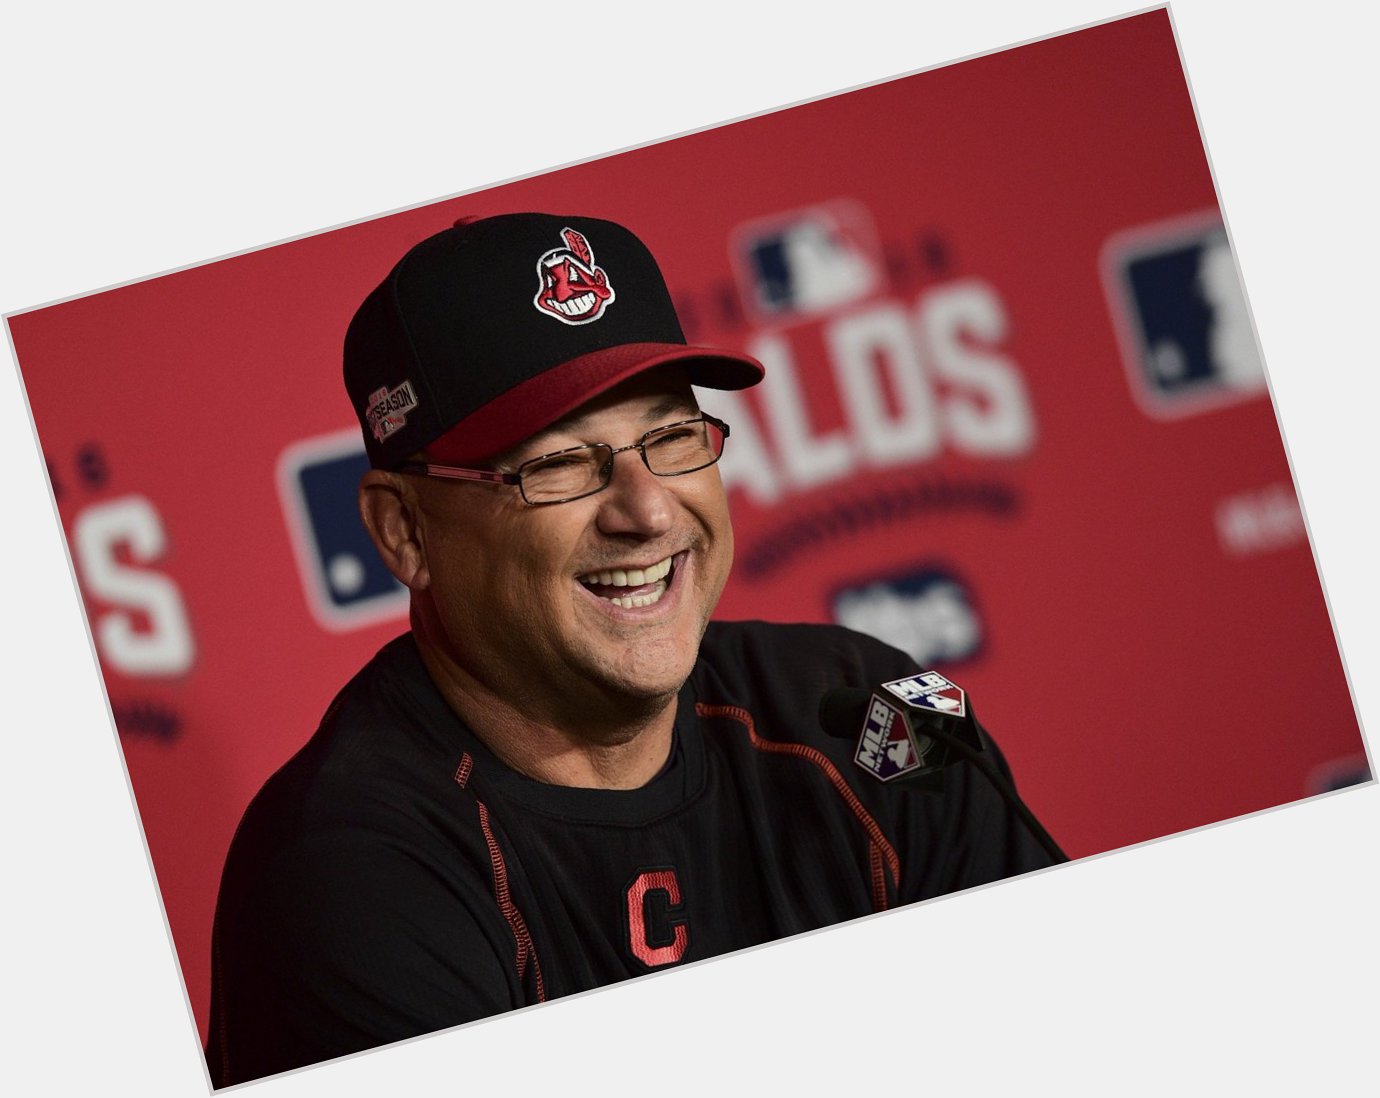 Last but not least, a very Happy 58th Birthday to skipper, Terry Francona!  